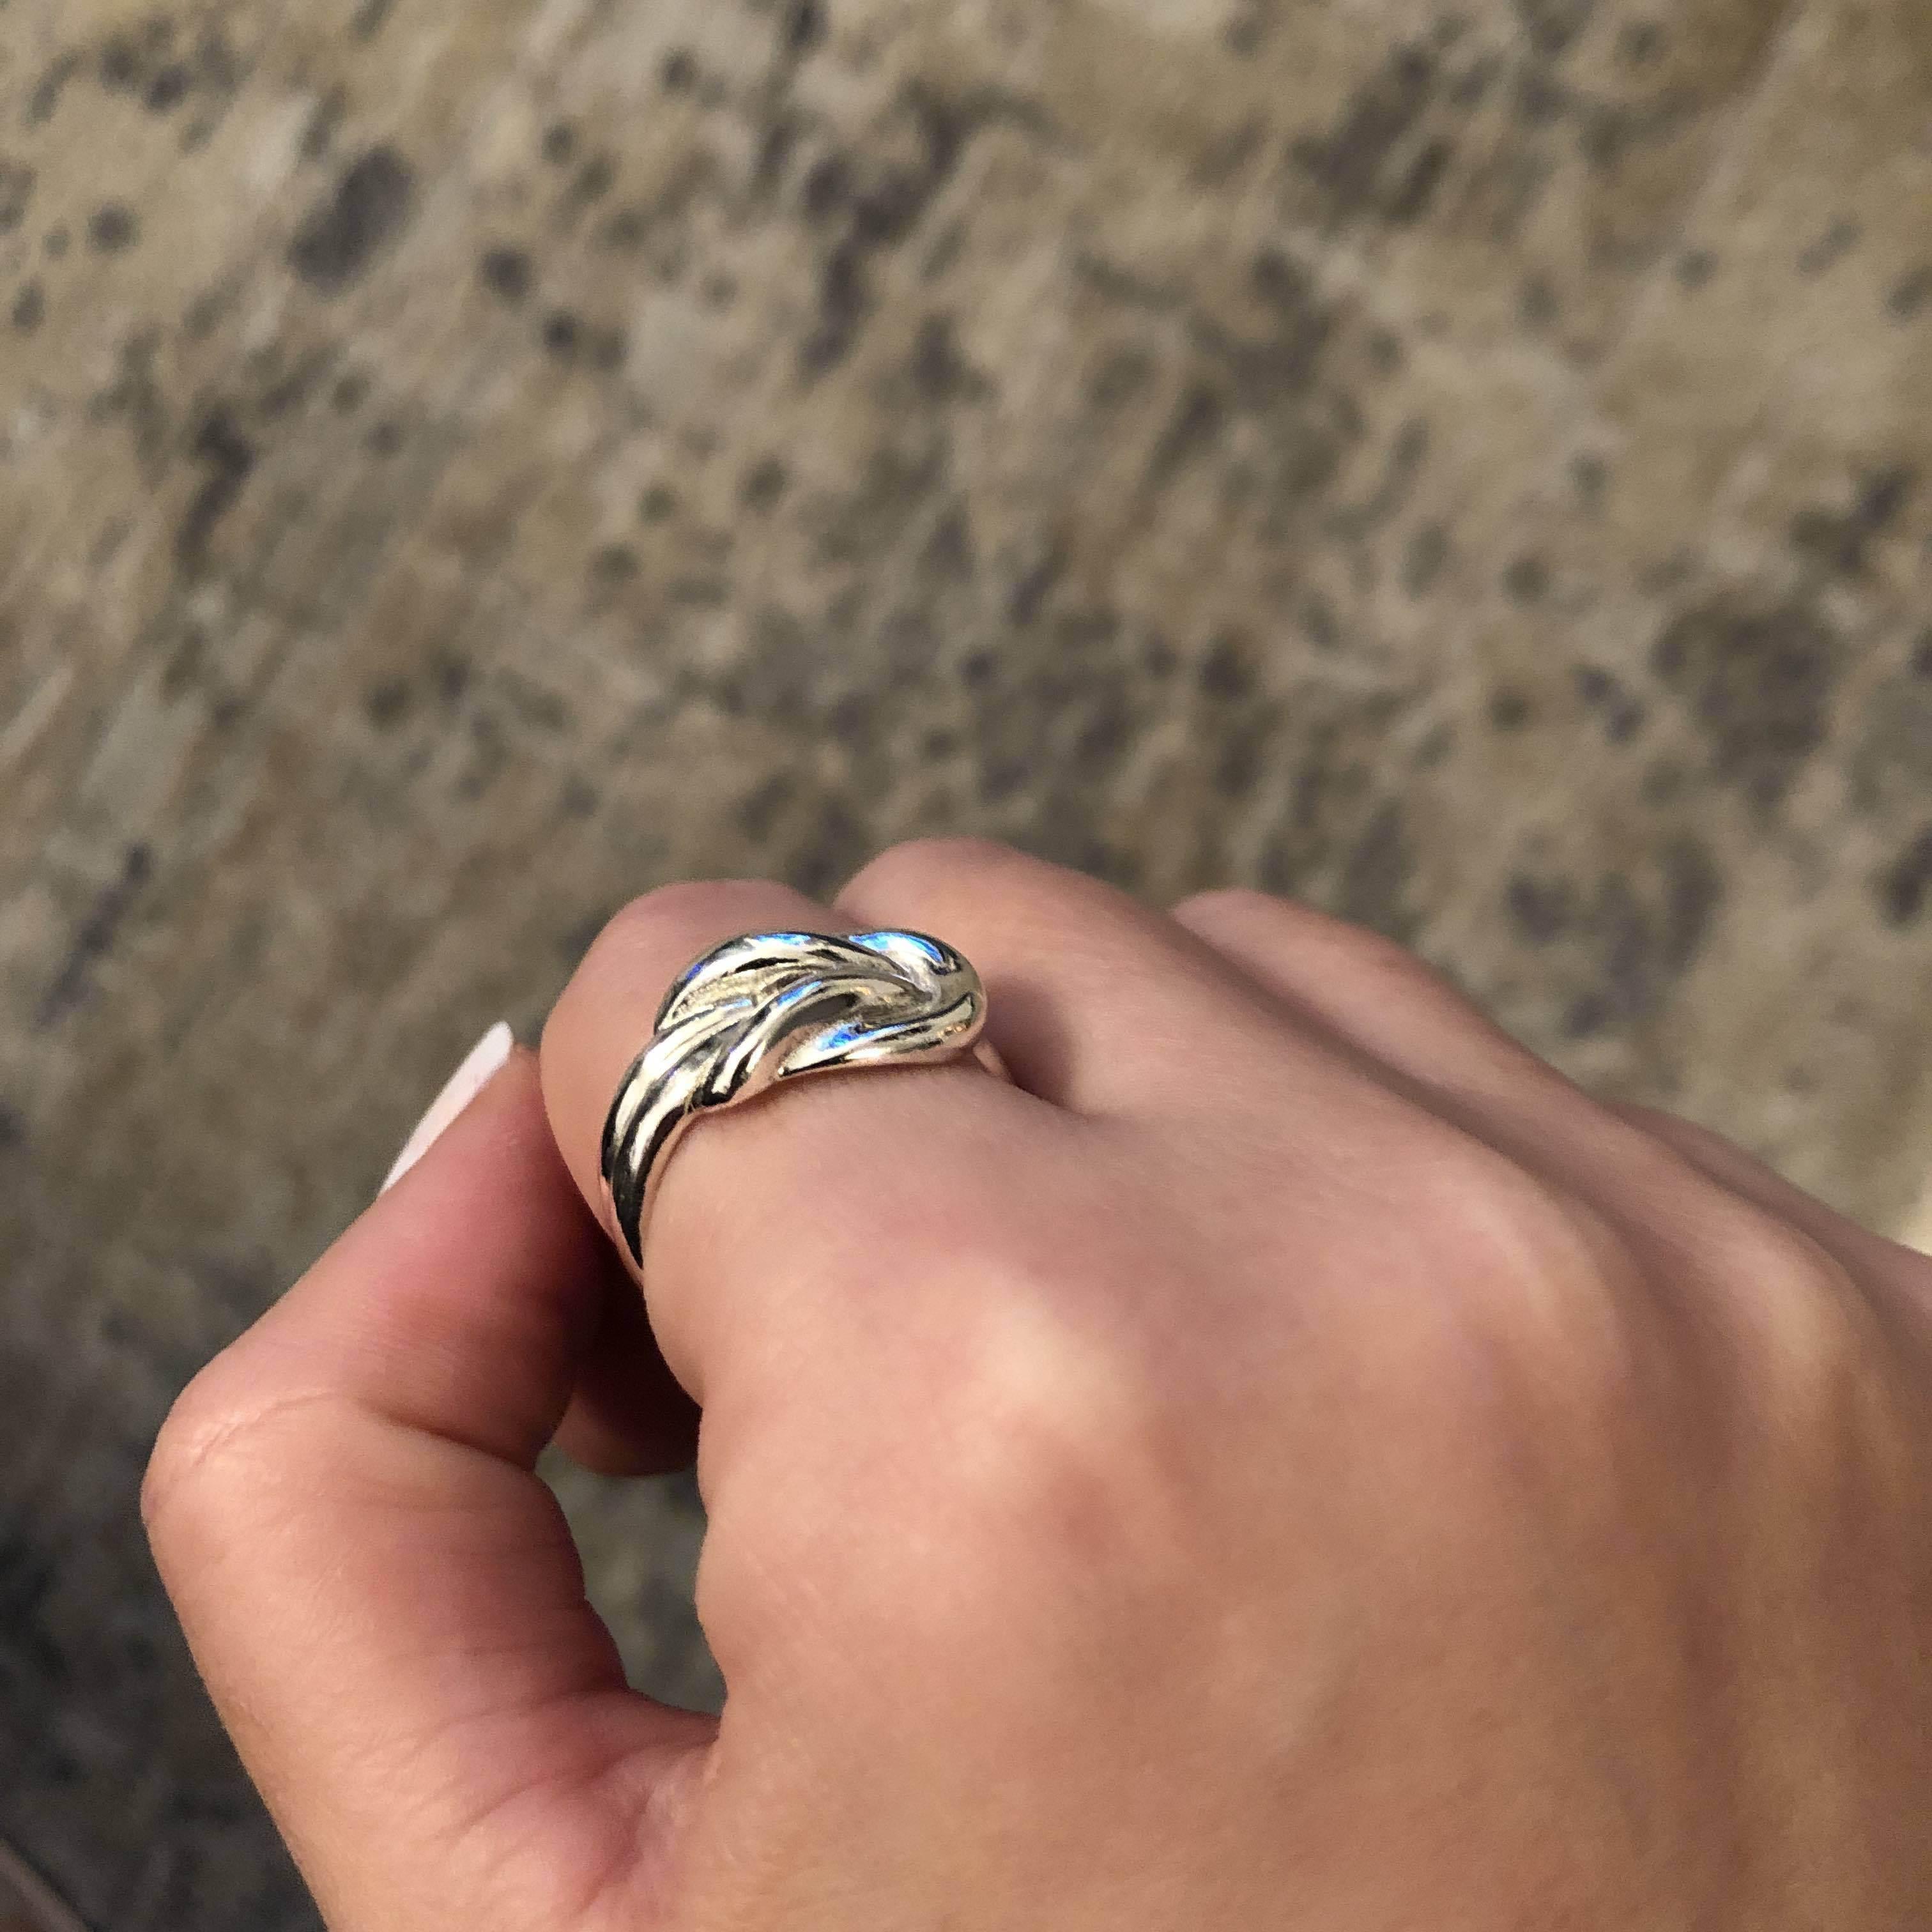 Love Knot Ring in Sterling Silver (DT-130)